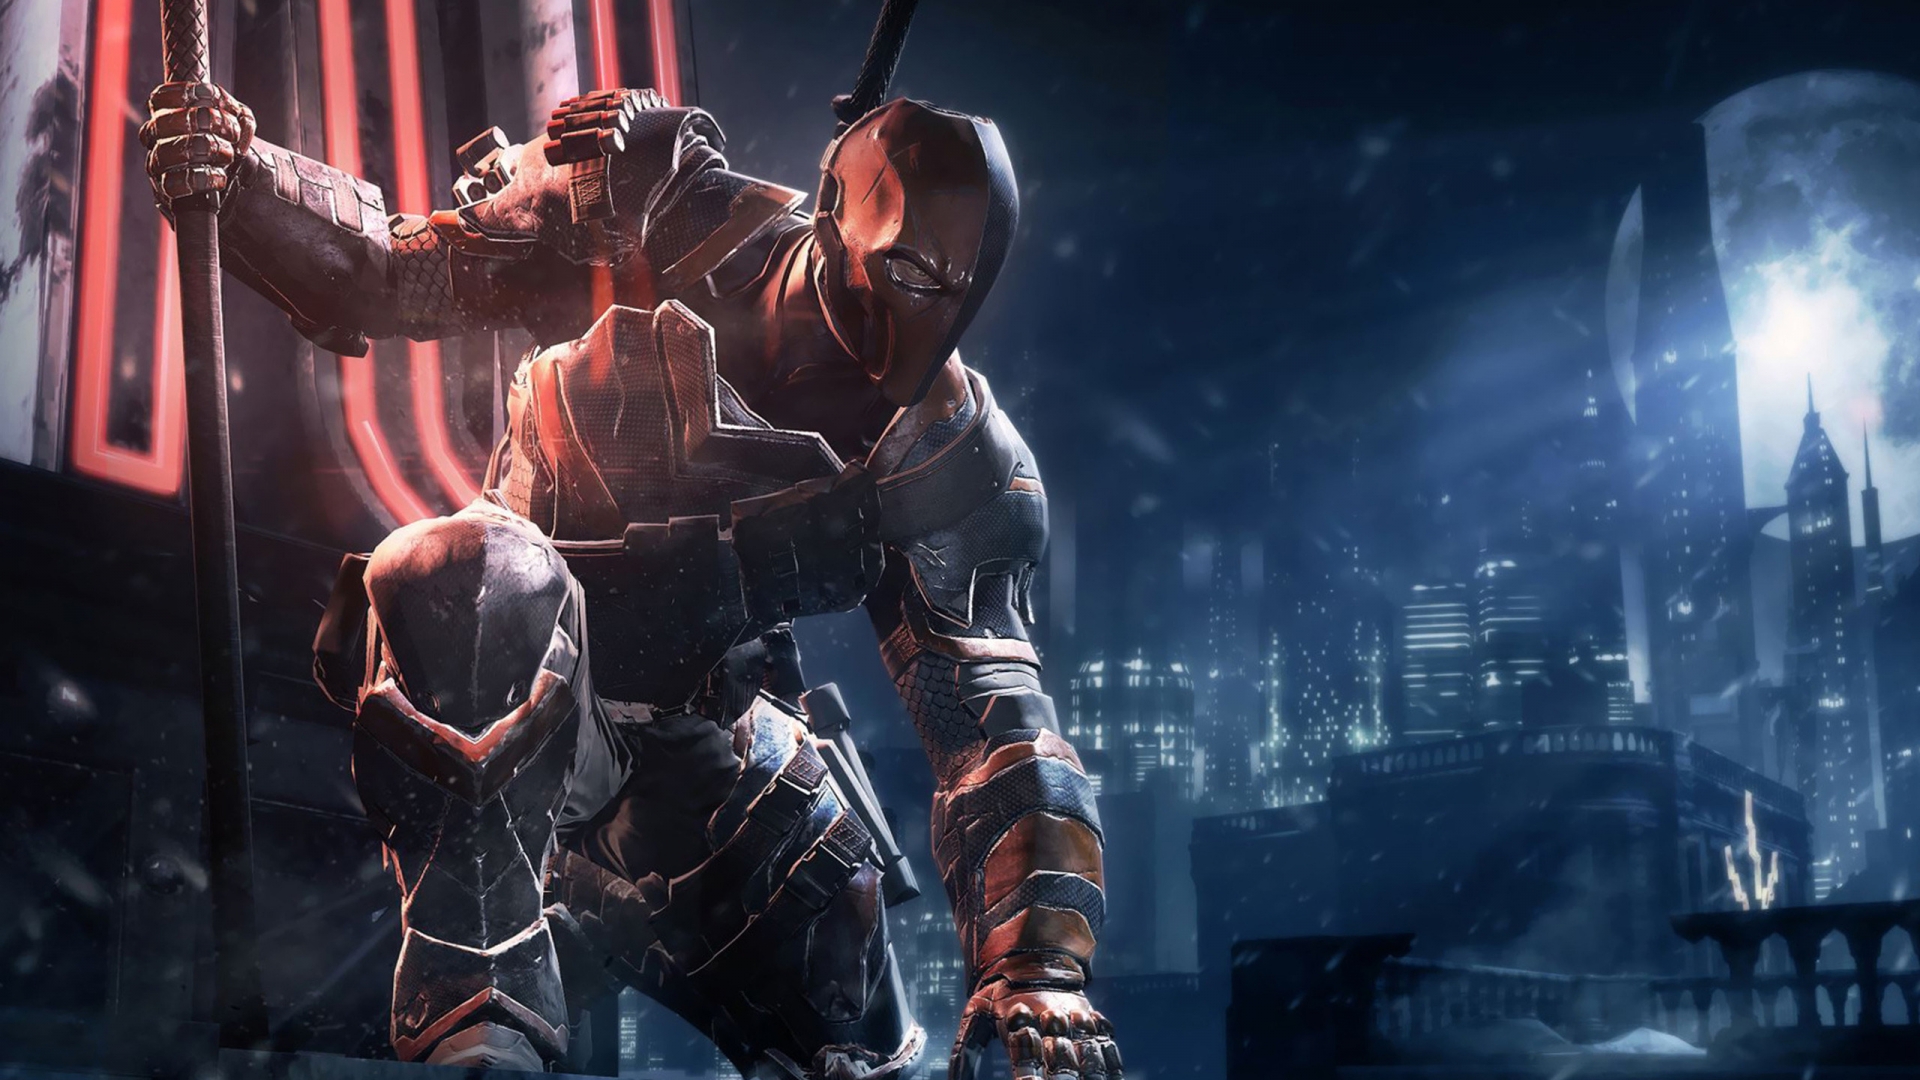 Deathstroke for 1920 x 1080 HDTV 1080p resolution